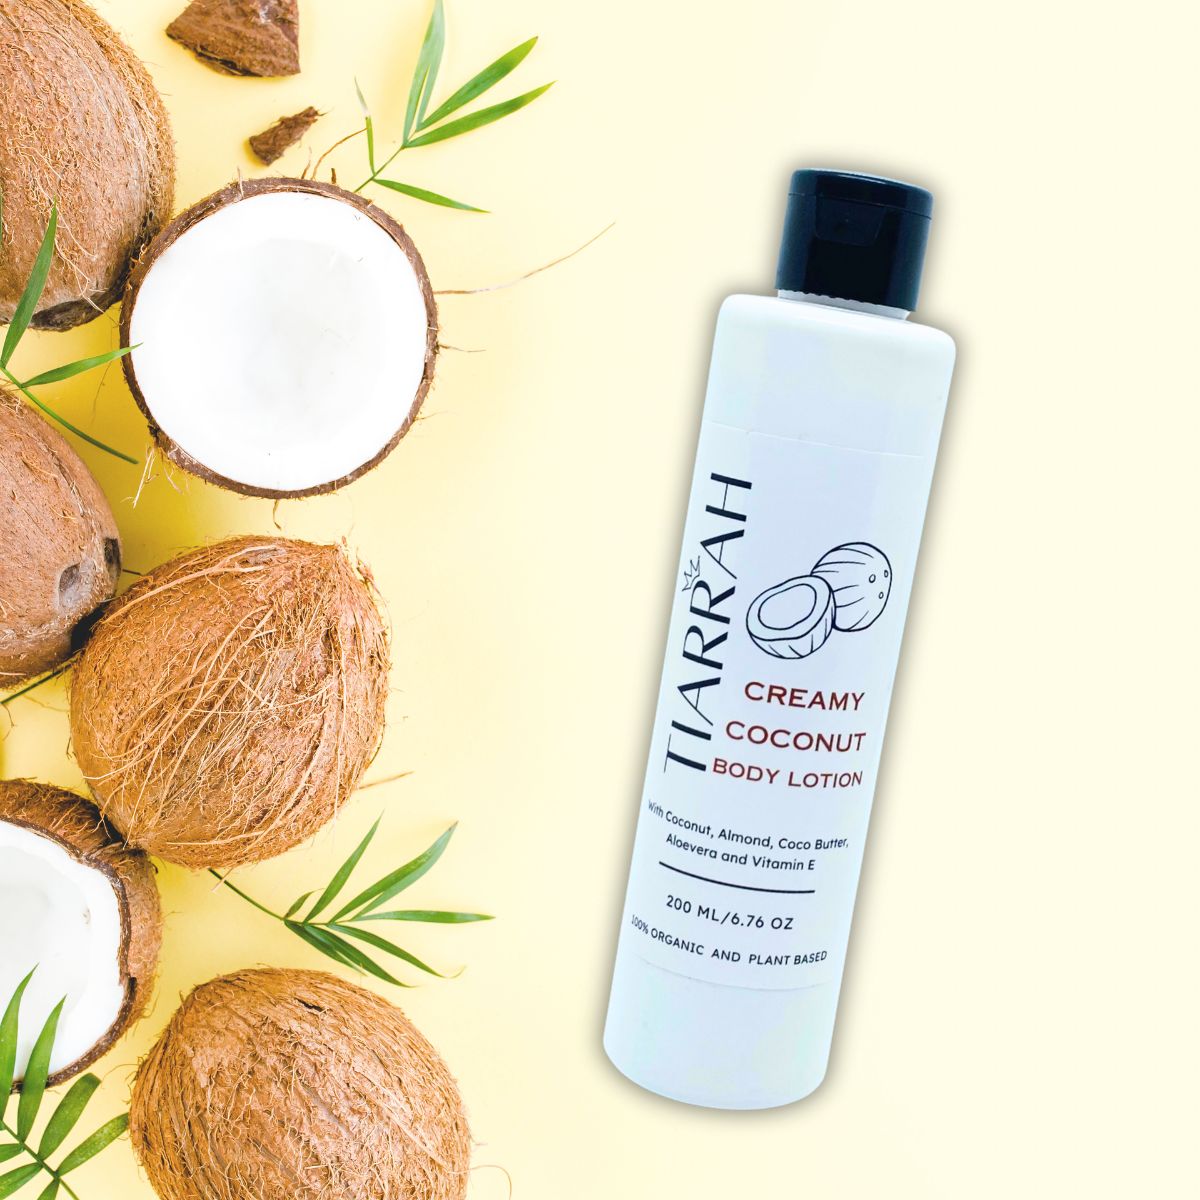 Luxury Creamy Coconut Body Lotion by Tiarrah: Organic, Non-Toxic - The Luxury Bath and Body Care Shop